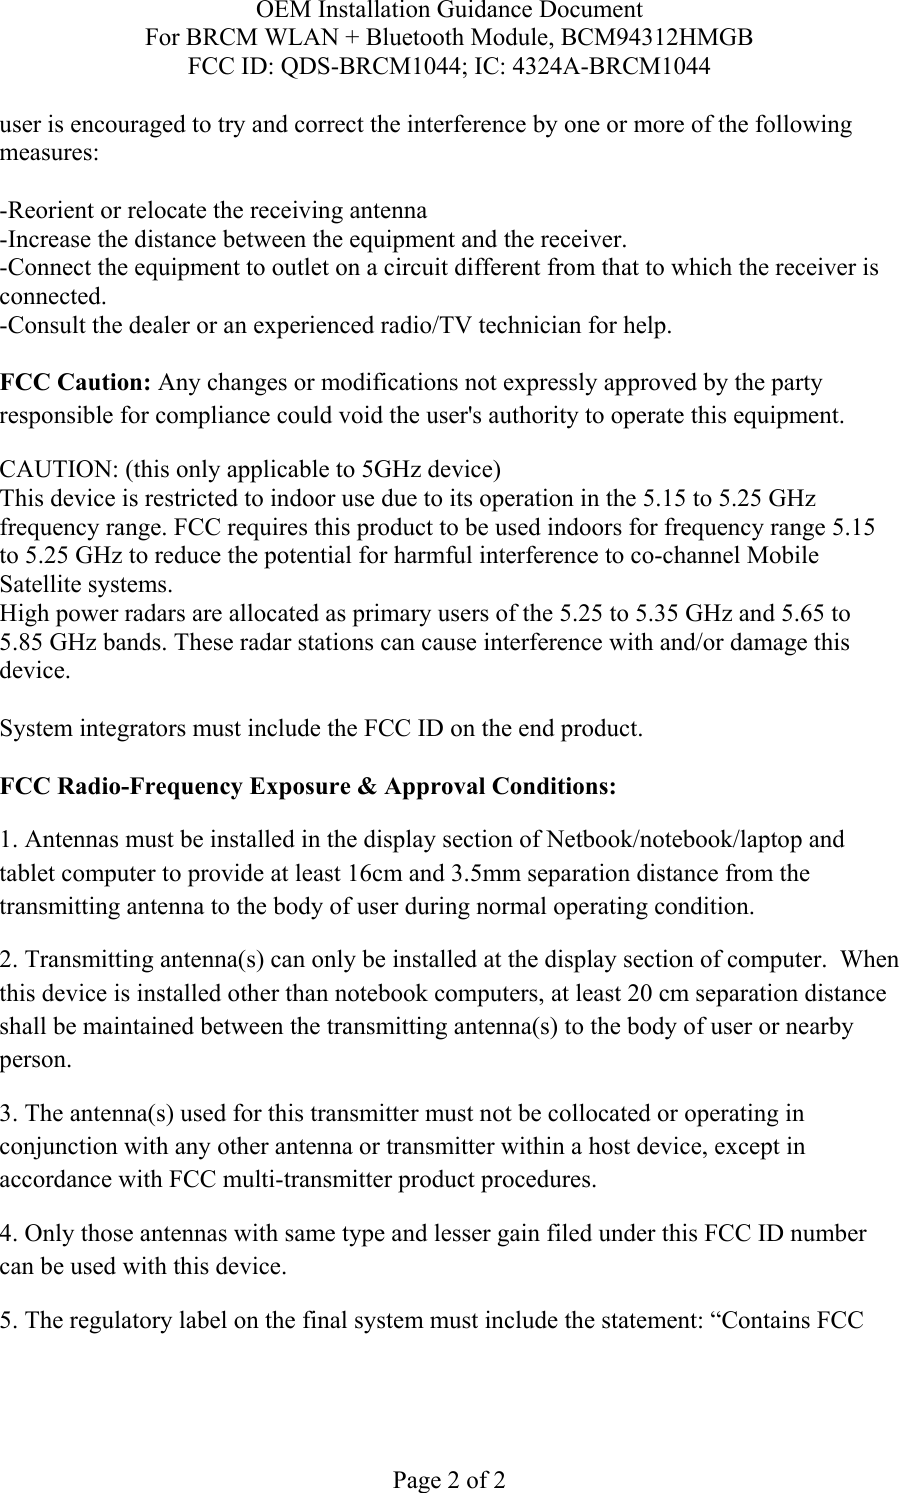 OEM Installation Guidance Document For BRCM WLAN + Bluetooth Module, BCM94312HMGB FCC ID: QDS-BRCM1044; IC: 4324A-BRCM1044  Page 2 of 2 user is encouraged to try and correct the interference by one or more of the following measures:   -Reorient or relocate the receiving antenna -Increase the distance between the equipment and the receiver. -Connect the equipment to outlet on a circuit different from that to which the receiver is connected. -Consult the dealer or an experienced radio/TV technician for help.  FCC Caution: Any changes or modifications not expressly approved by the party responsible for compliance could void the user&apos;s authority to operate this equipment. CAUTION: (this only applicable to 5GHz device) This device is restricted to indoor use due to its operation in the 5.15 to 5.25 GHz frequency range. FCC requires this product to be used indoors for frequency range 5.15 to 5.25 GHz to reduce the potential for harmful interference to co-channel Mobile Satellite systems. High power radars are allocated as primary users of the 5.25 to 5.35 GHz and 5.65 to 5.85 GHz bands. These radar stations can cause interference with and/or damage this device.  System integrators must include the FCC ID on the end product.   FCC Radio-Frequency Exposure &amp; Approval Conditions: 1. Antennas must be installed in the display section of Netbook/notebook/laptop and tablet computer to provide at least 16cm and 3.5mm separation distance from the transmitting antenna to the body of user during normal operating condition. 2. Transmitting antenna(s) can only be installed at the display section of computer.  When this device is installed other than notebook computers, at least 20 cm separation distance shall be maintained between the transmitting antenna(s) to the body of user or nearby person. 3. The antenna(s) used for this transmitter must not be collocated or operating in conjunction with any other antenna or transmitter within a host device, except in accordance with FCC multi-transmitter product procedures. 4. Only those antennas with same type and lesser gain filed under this FCC ID number can be used with this device. 5. The regulatory label on the final system must include the statement: “Contains FCC 